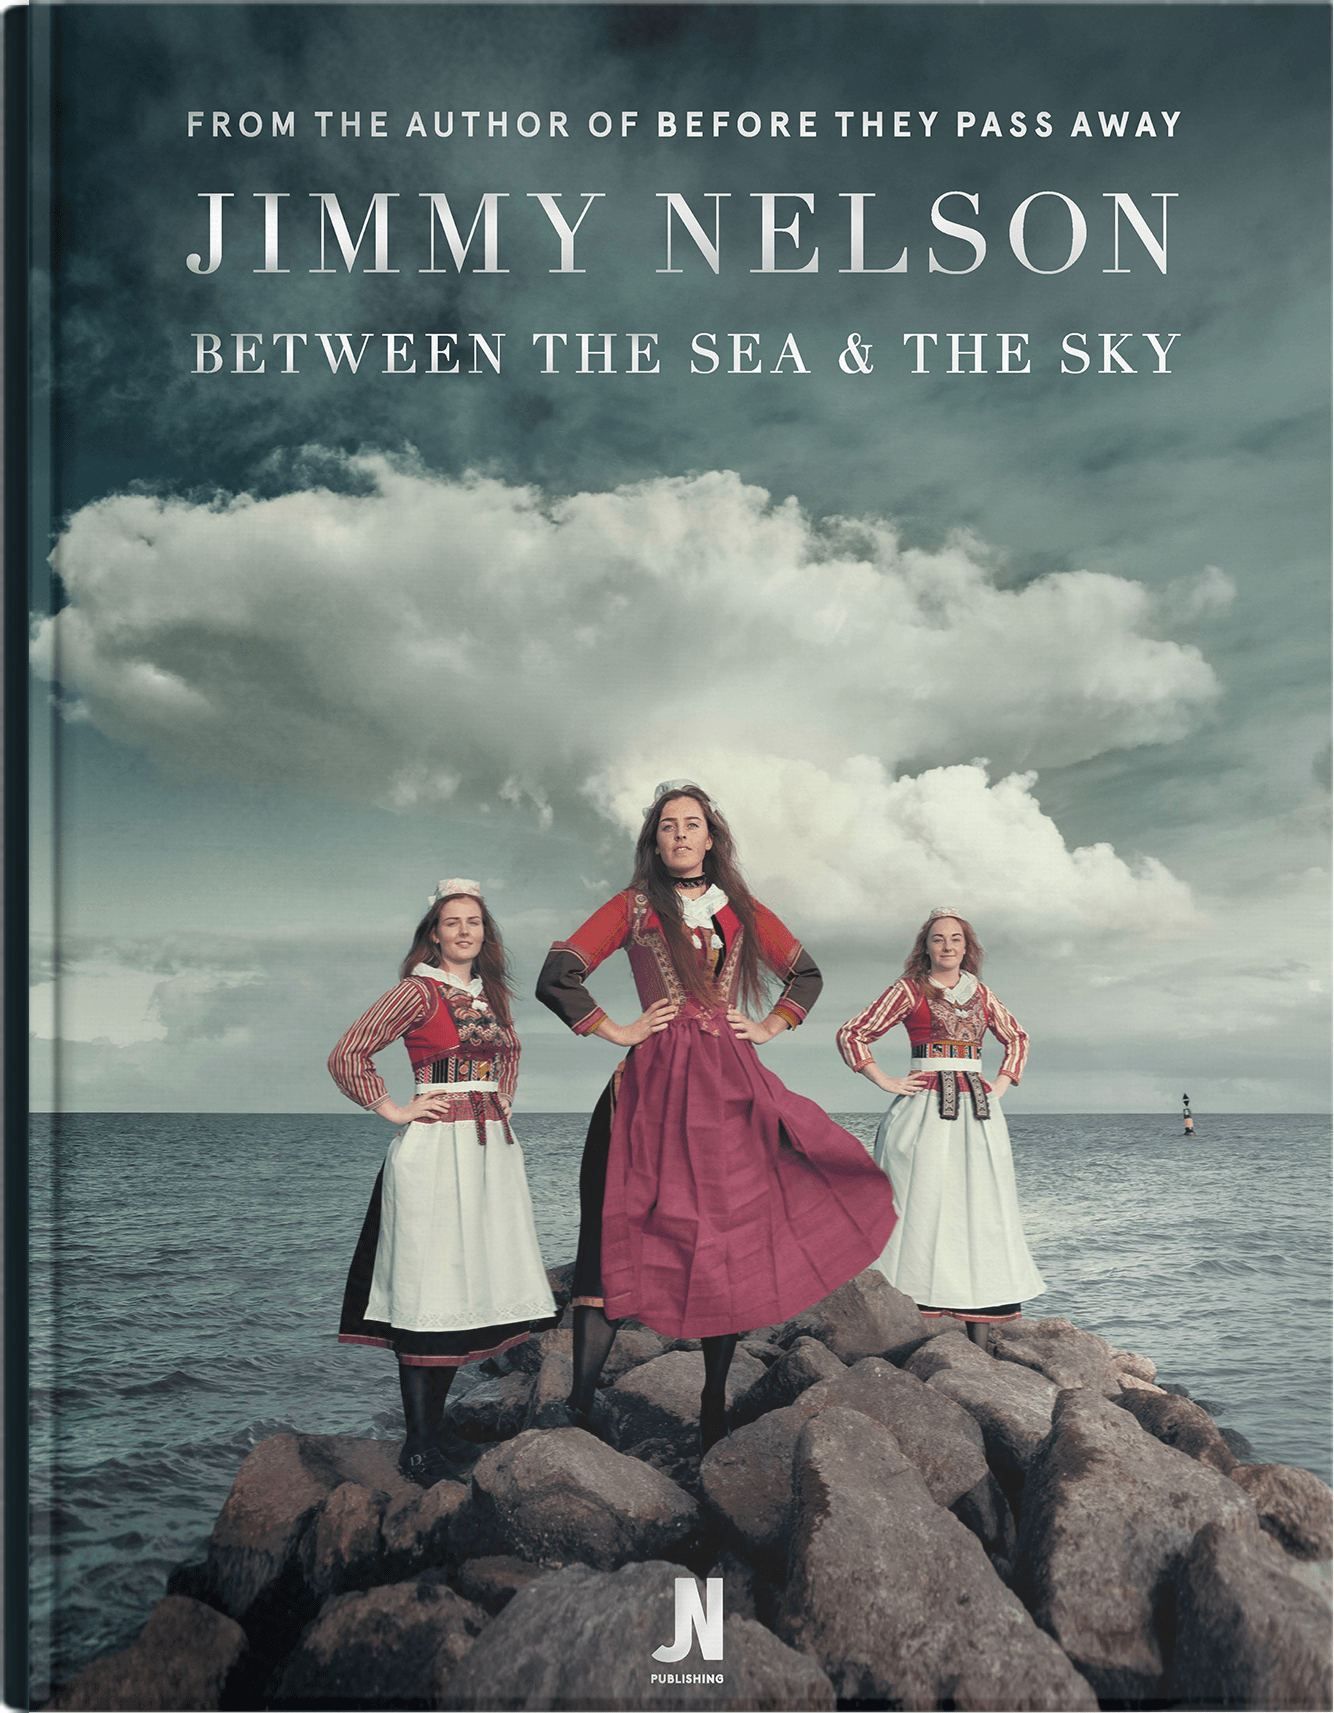 Jimmy Nelson - Between the Sea & the Sky 